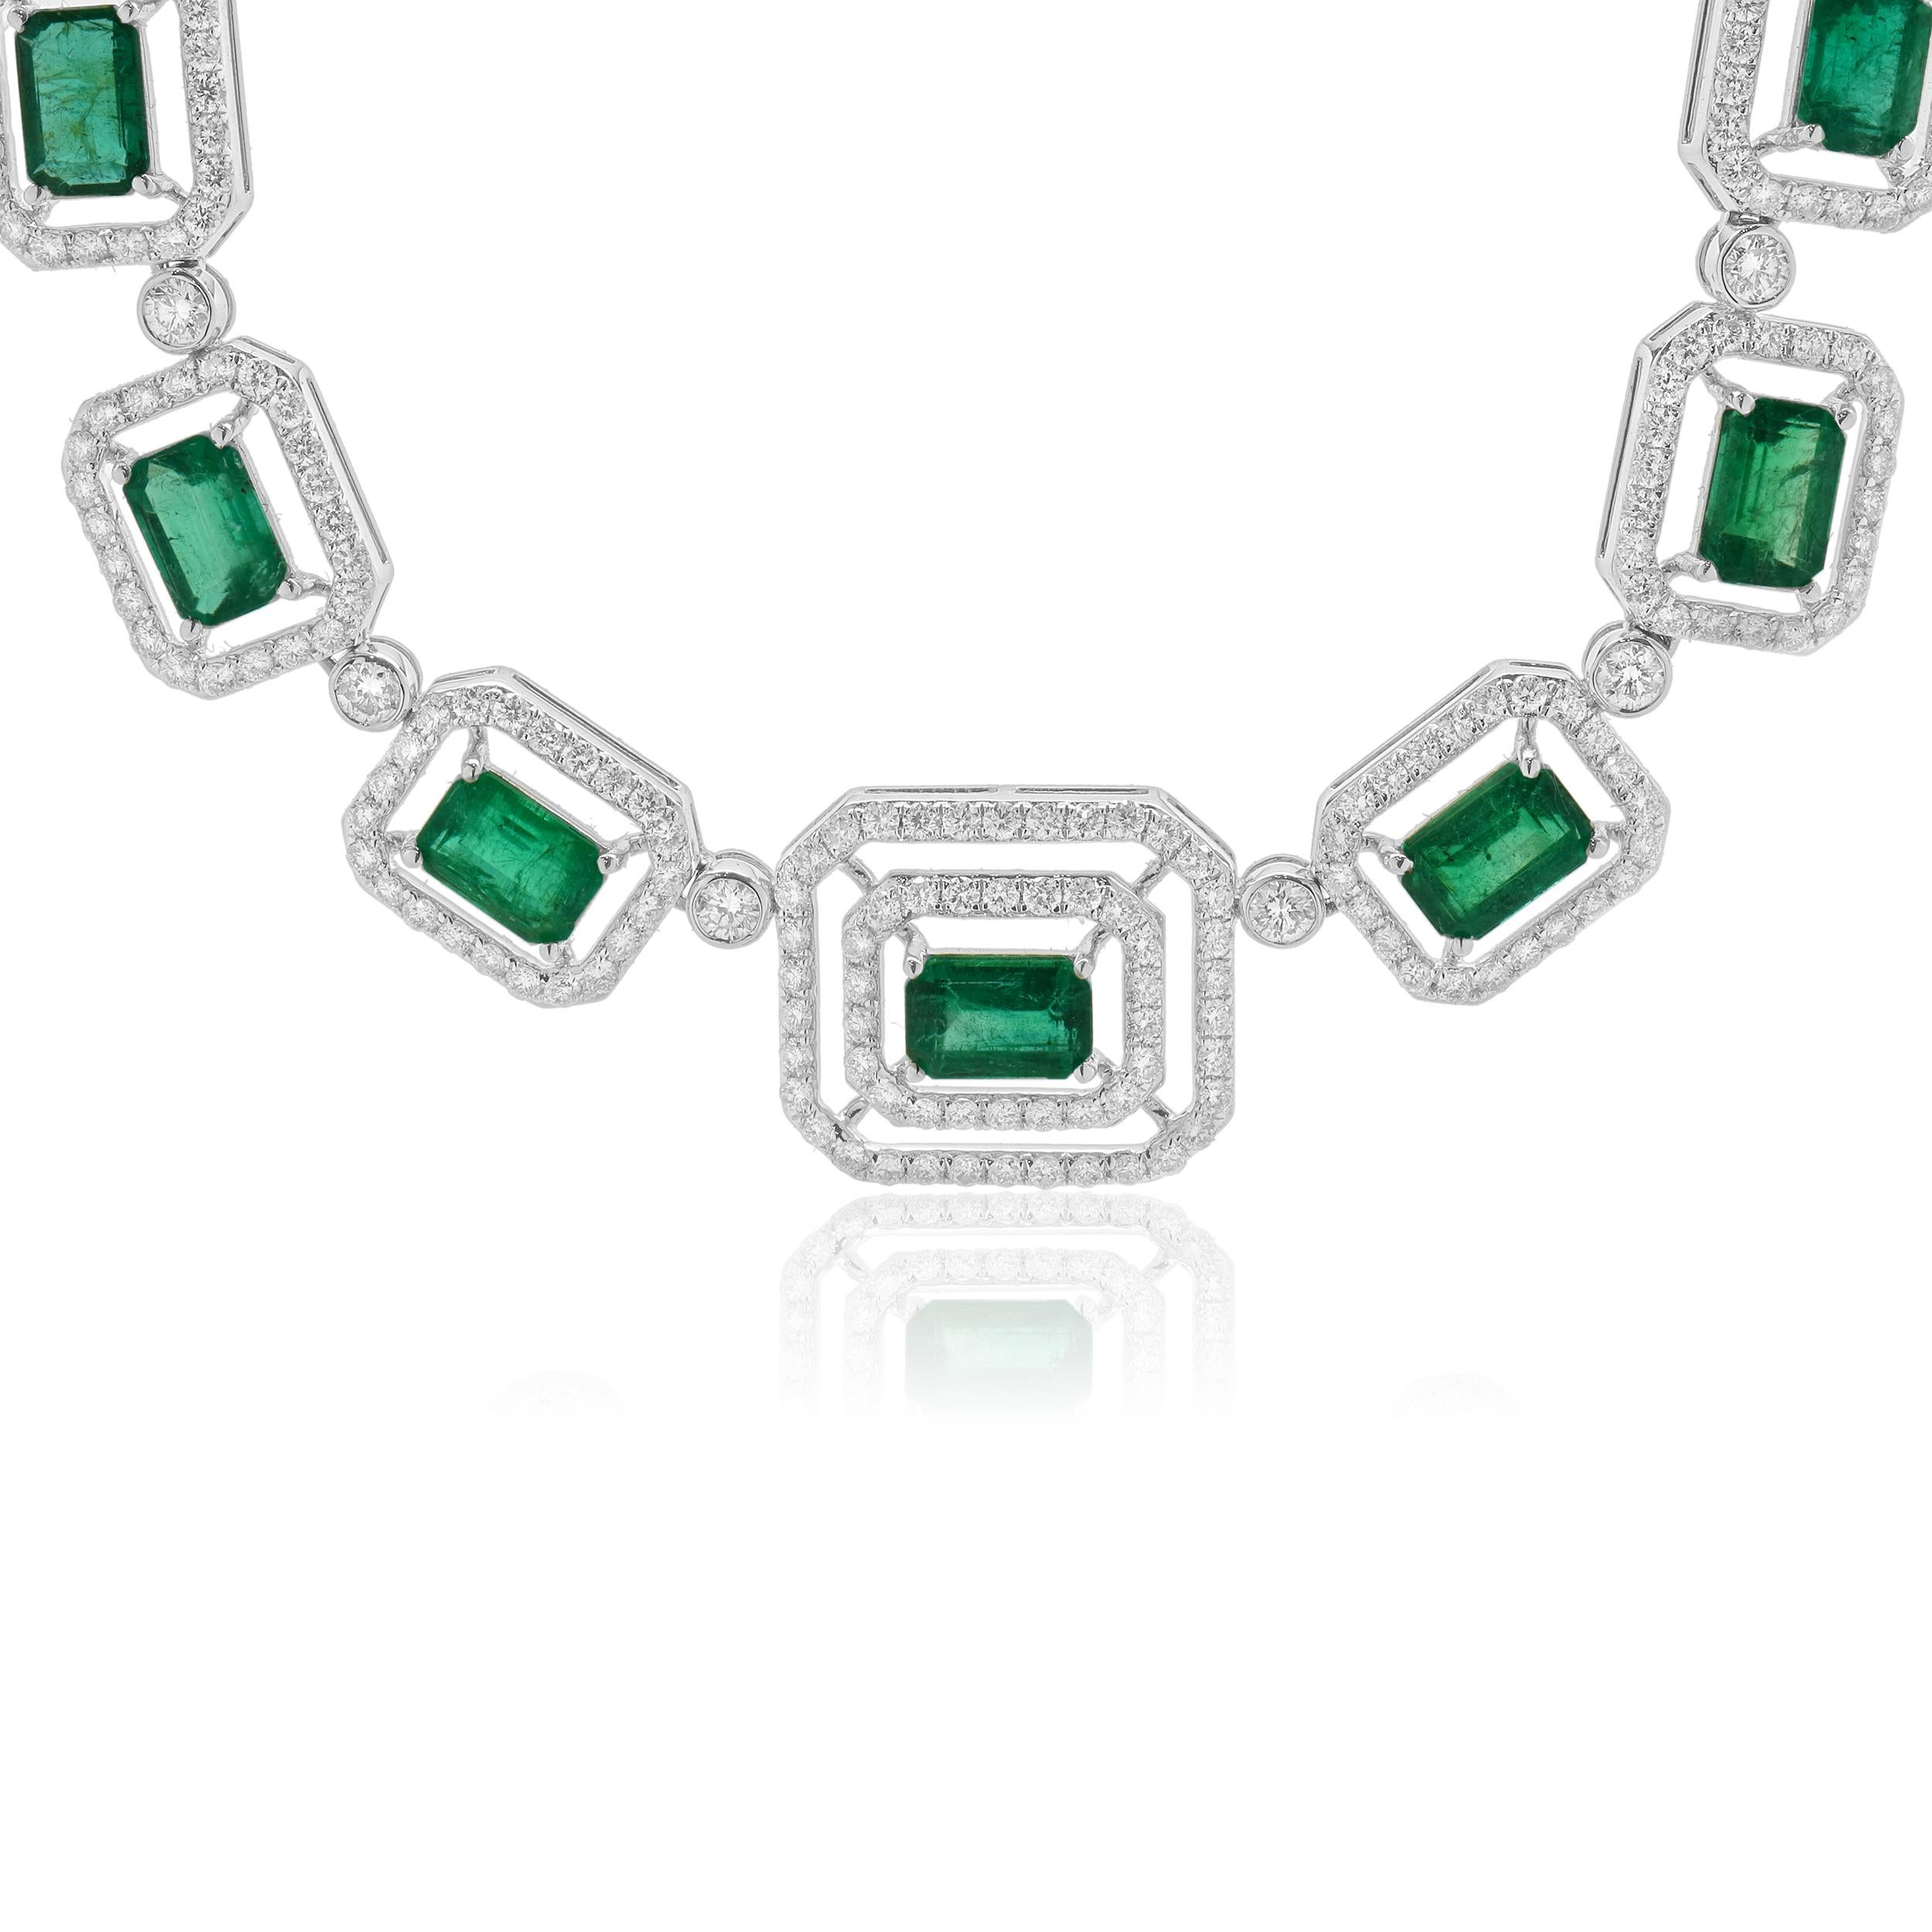 Designer: custom
Material: 14K white gold
Diamond: 801 round brilliant cut = 7.23cttw
Color: G
Clarity: VS-SI1
Emerald: 31 = 18.14cttw AAA+
Dimensions: necklace measures 16-inches in length
Weight: 37.00 grams